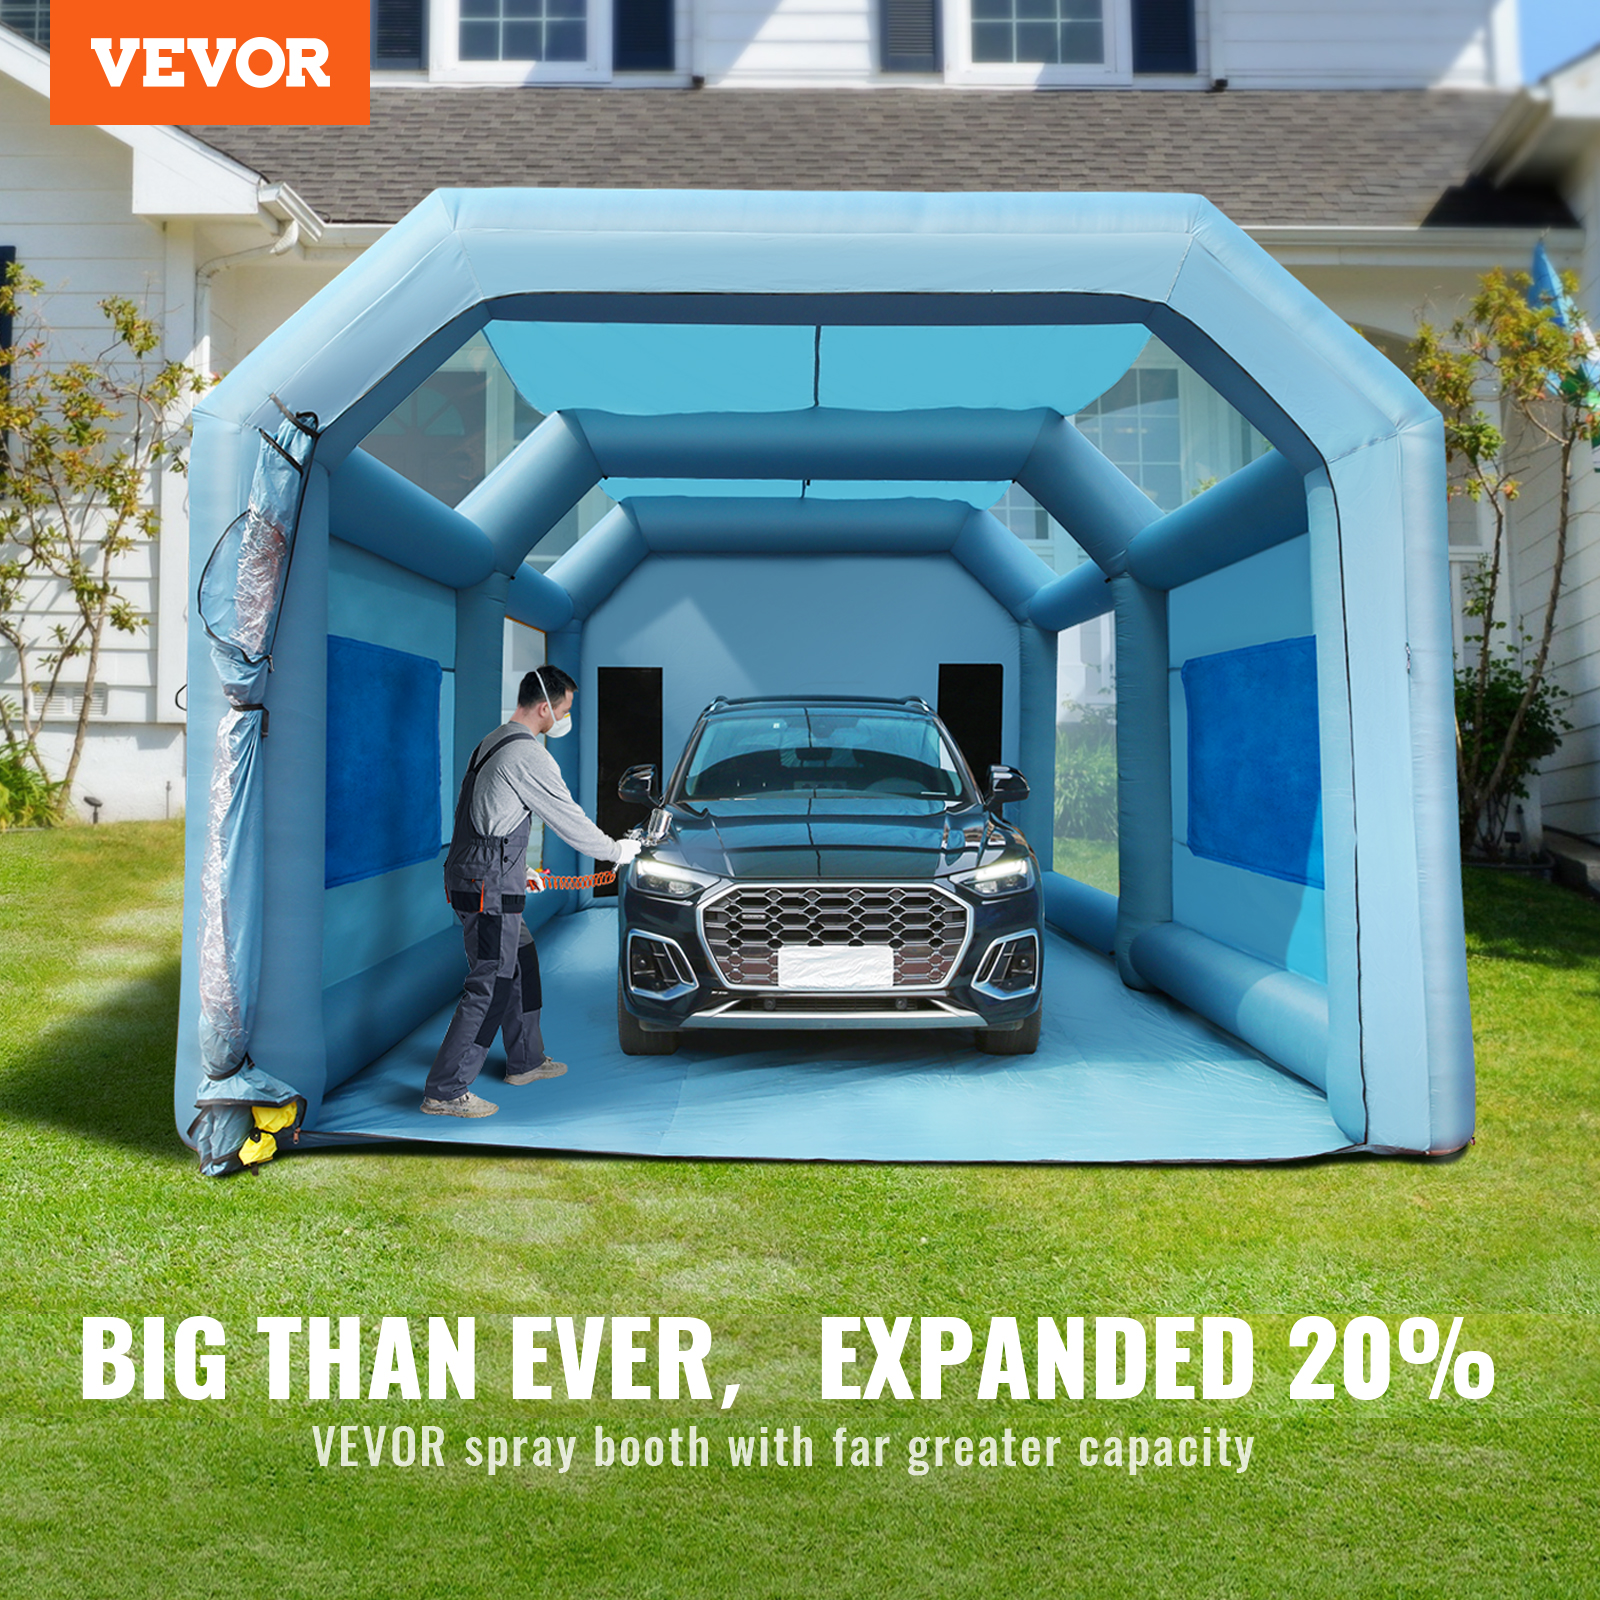 VEVOR Inflatable Paint Booth 20 ft. x 10 ft. x 8.2 ft. Car Paint Tent w/.Filter & 2-Blowers for Car Parking Tent Workstation